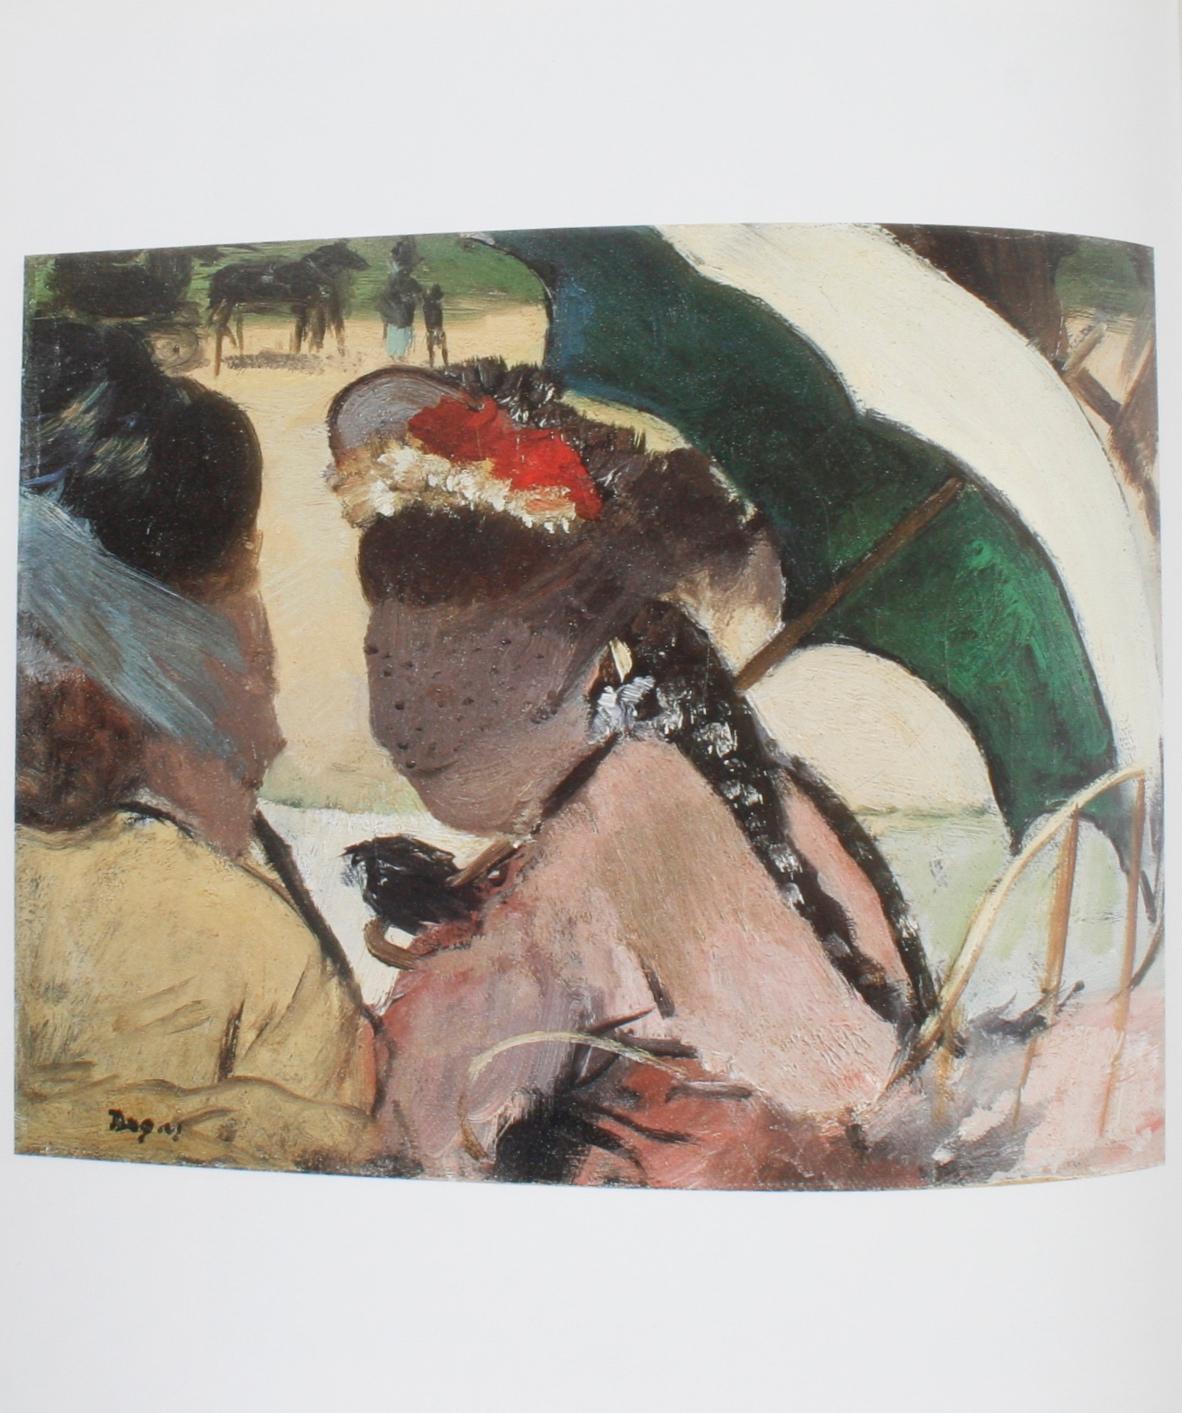 Paper Degas by Robert Gordon and Andrew Forge, Signed and Inscribed Edition